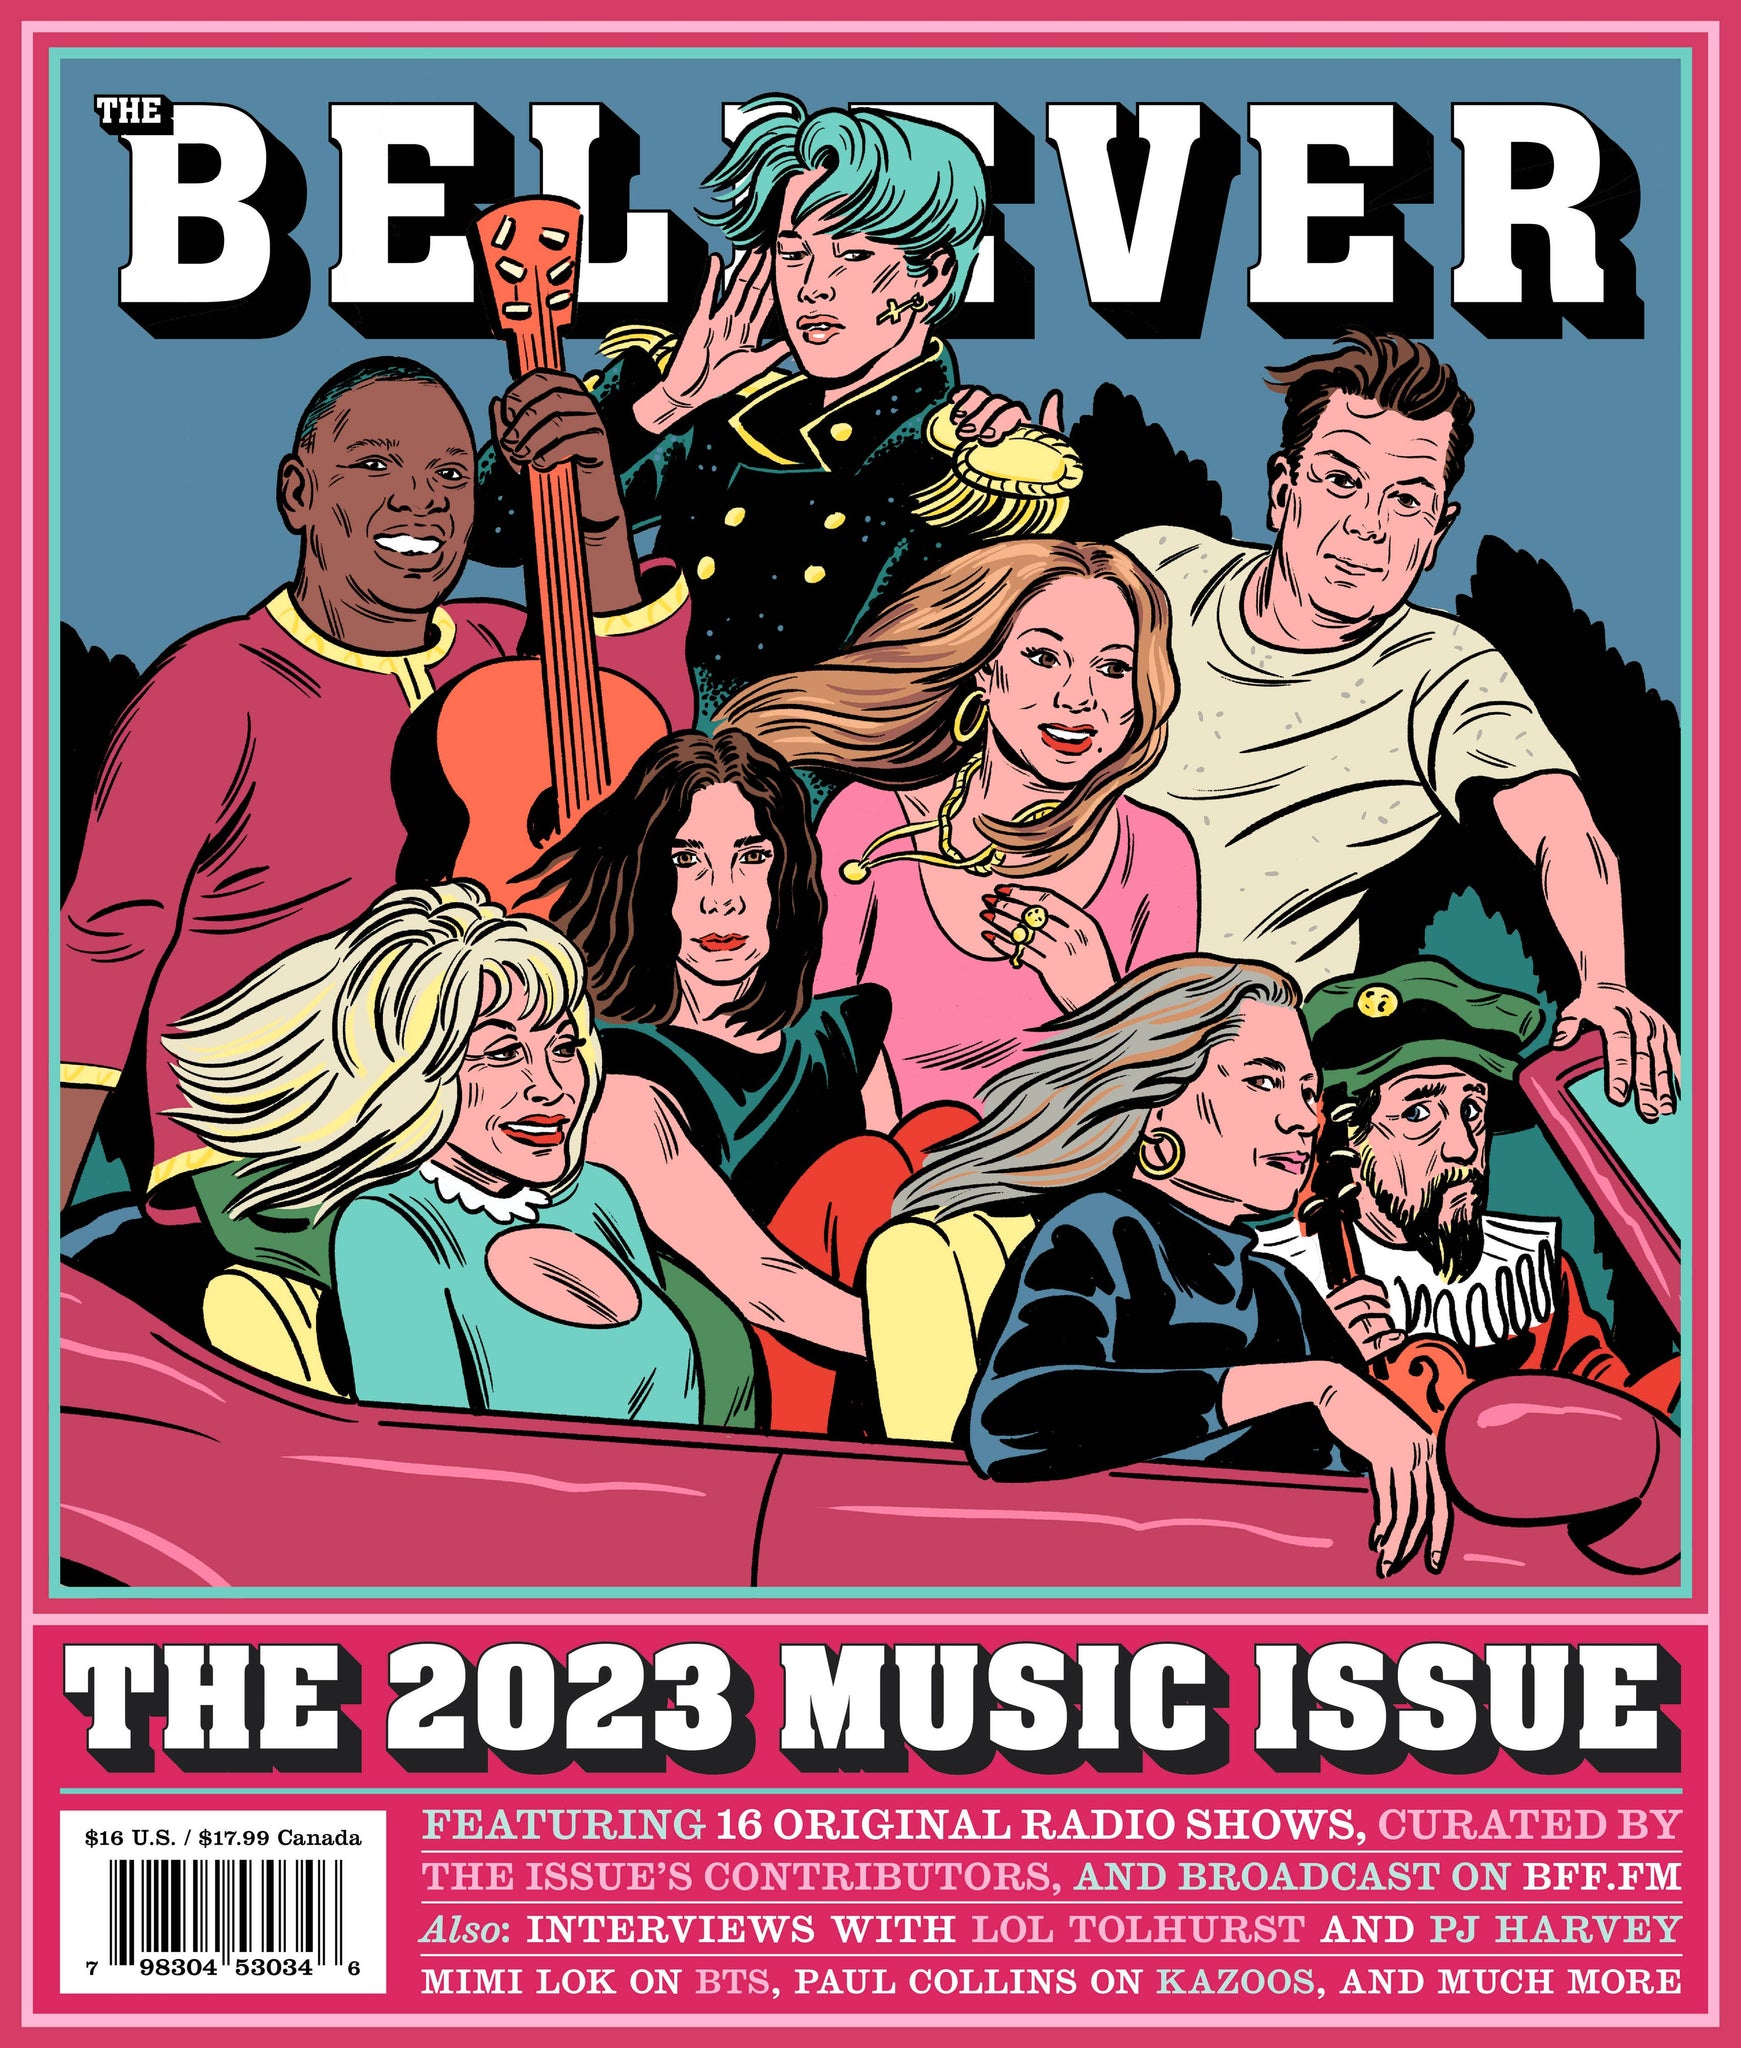 The Believer #144: Winter 23/24 (Music Issue)